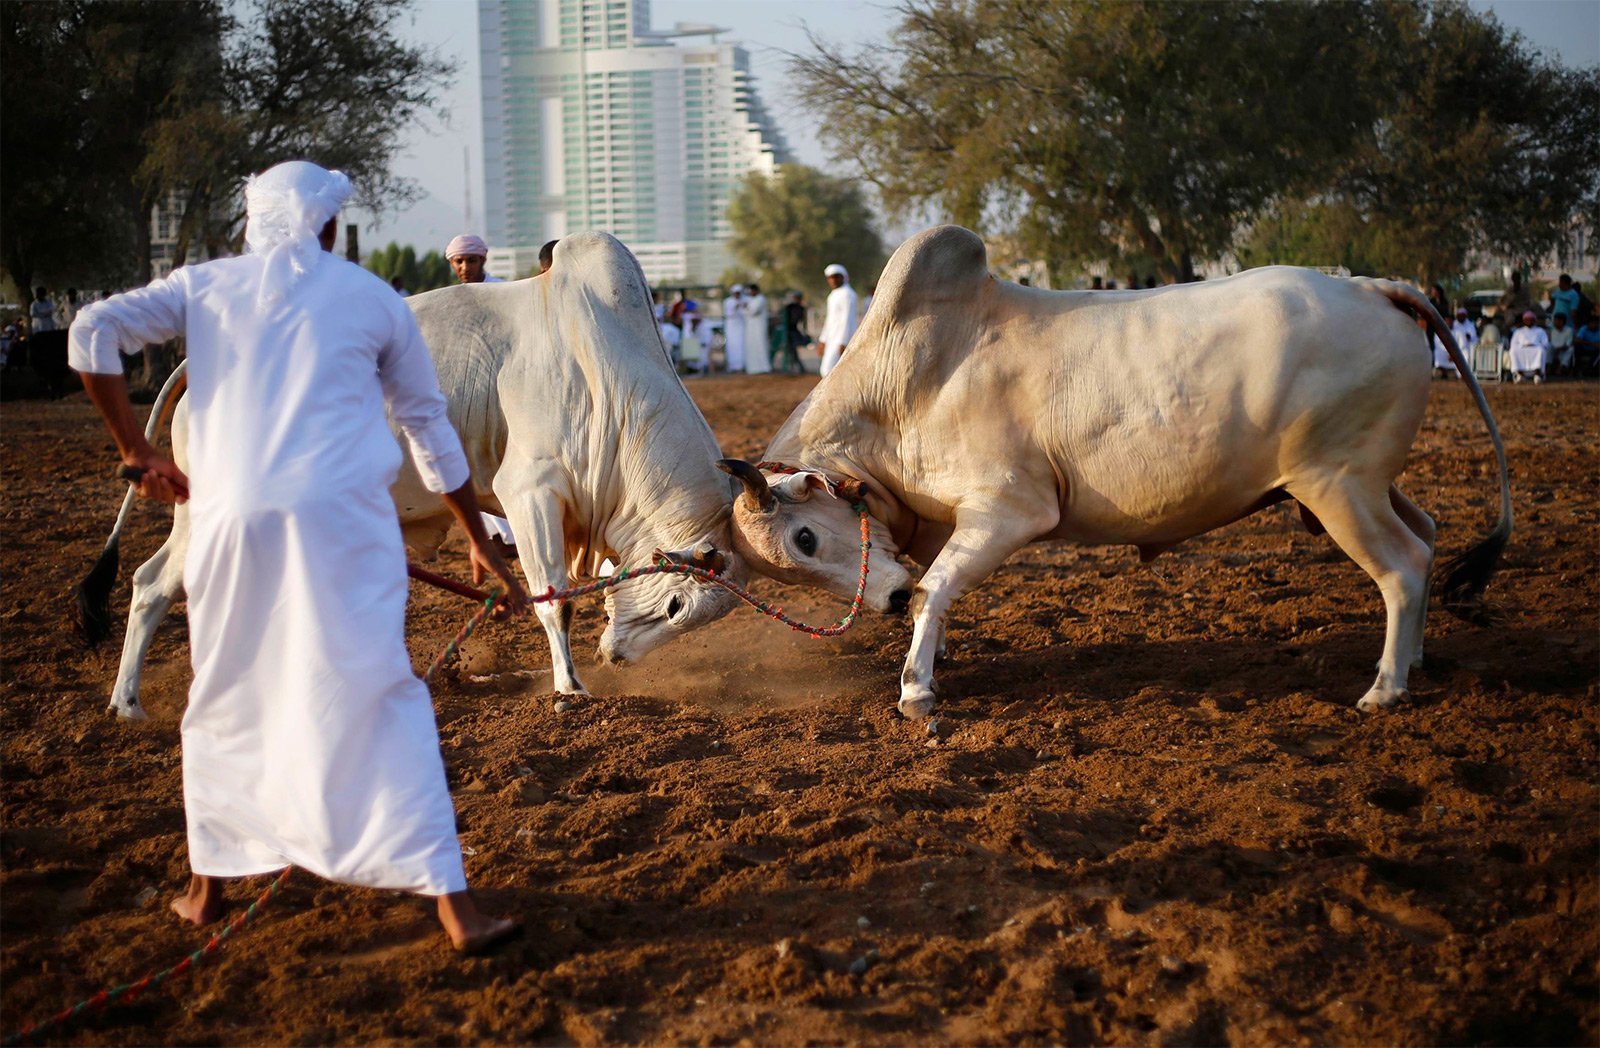 How to see bullfights in Fujairah